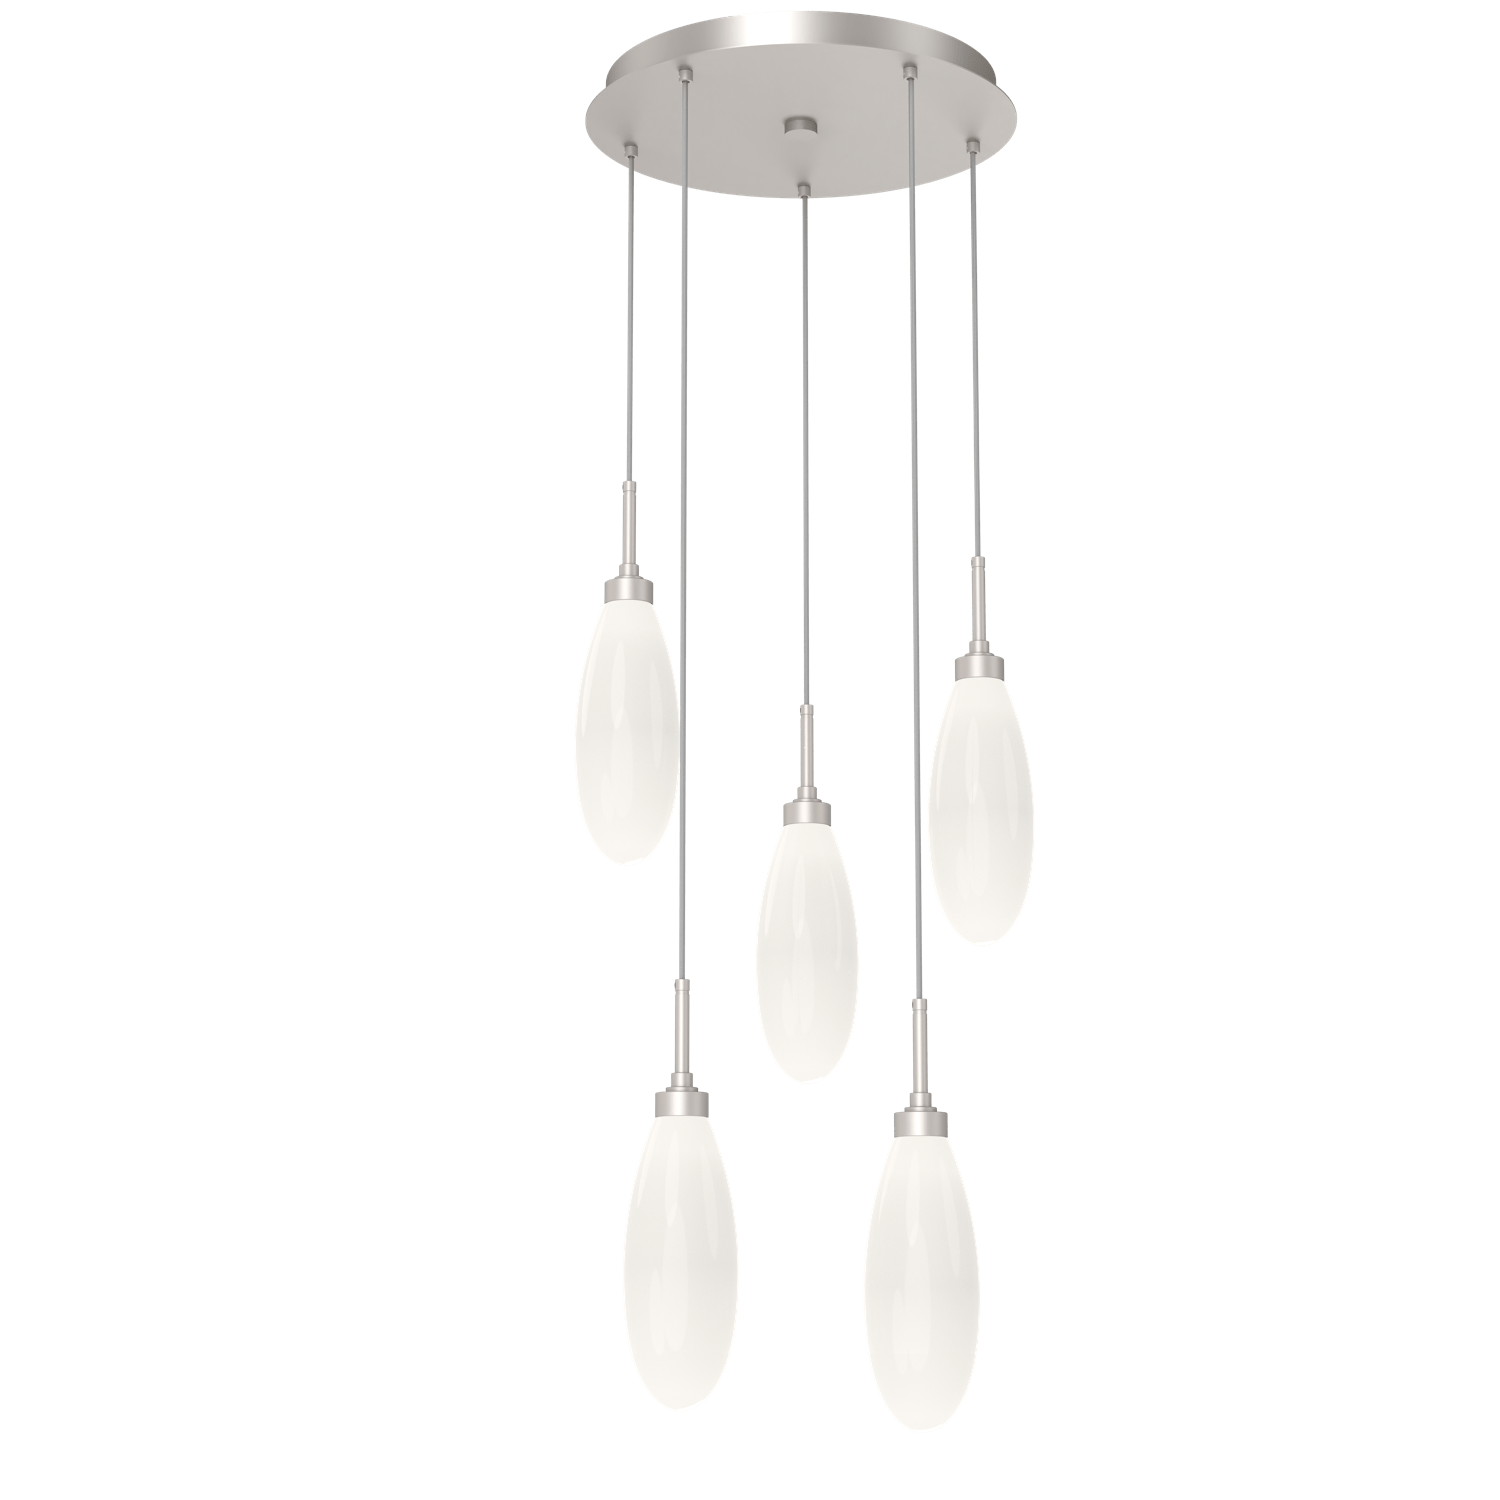 CHB0071-05-BS-WL-LL-Hammerton-Studio-Fiori-5-light-round-pendant-chandelier-with-metallic-beige-silver-finish-and-opal-white-glass-shades-and-LED-lamping